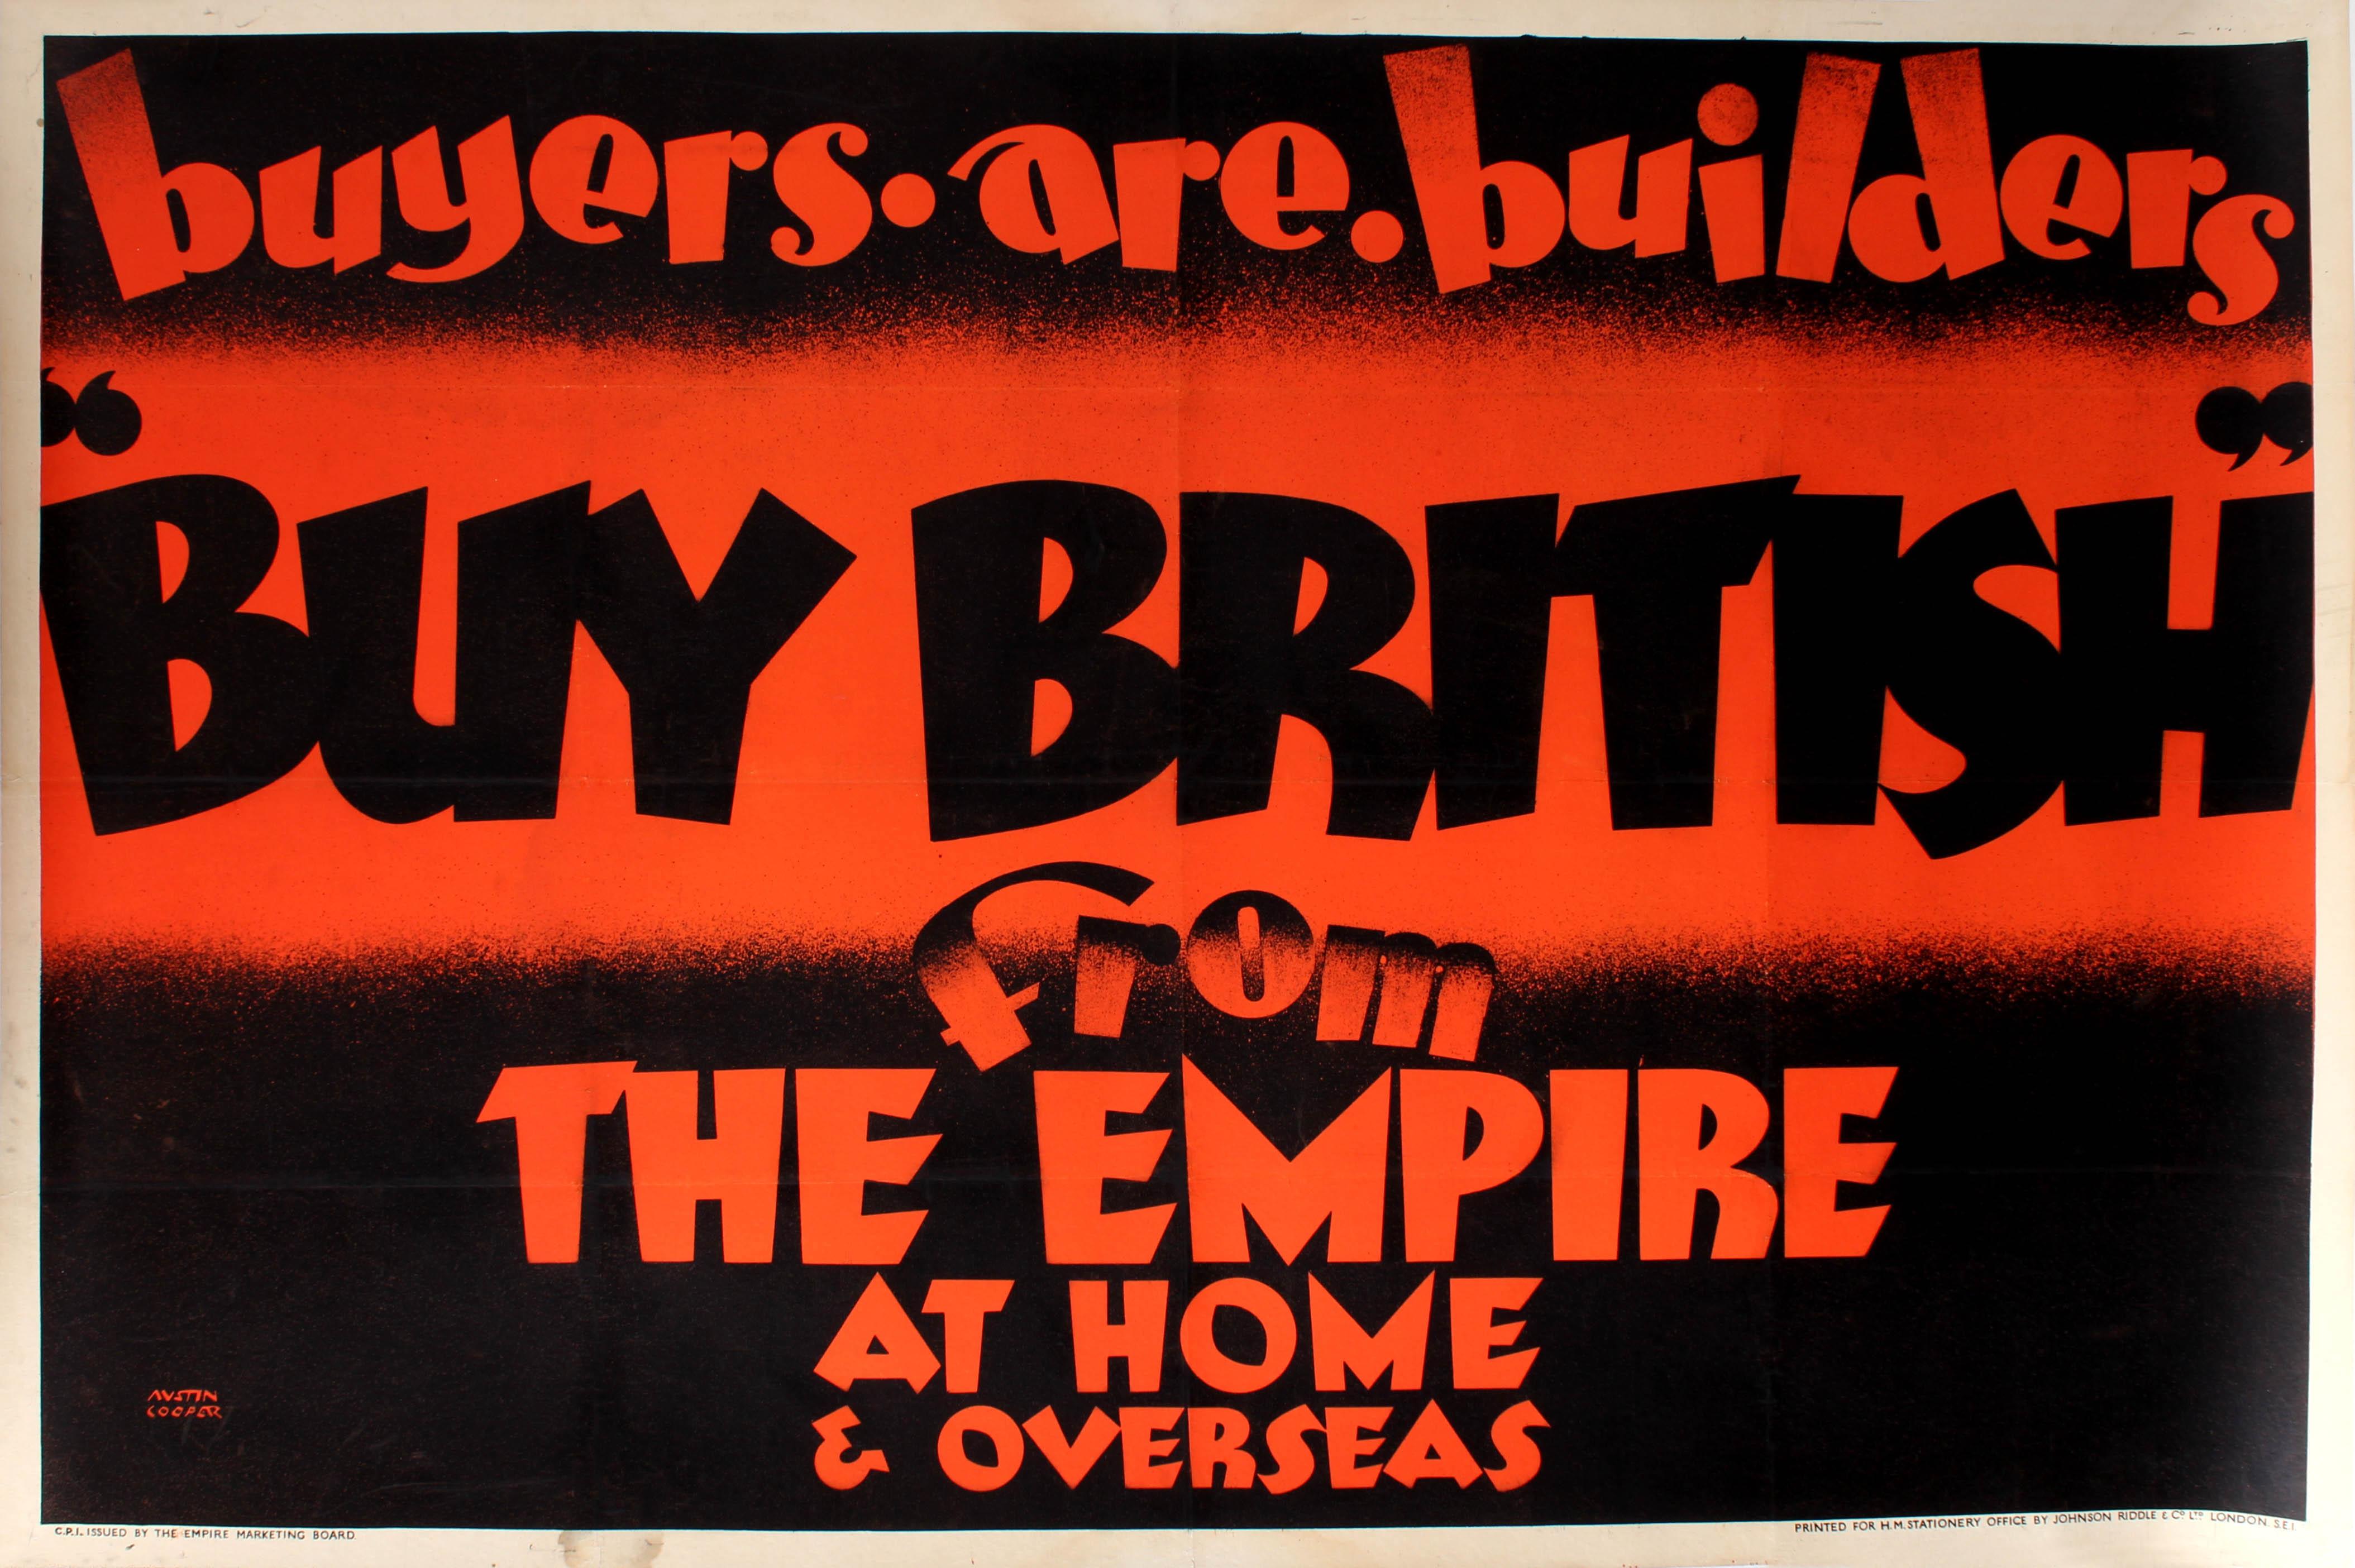 Austin Cooper Print - Large Original Vintage Empire Marketing Board Poster Buy British From The Empire